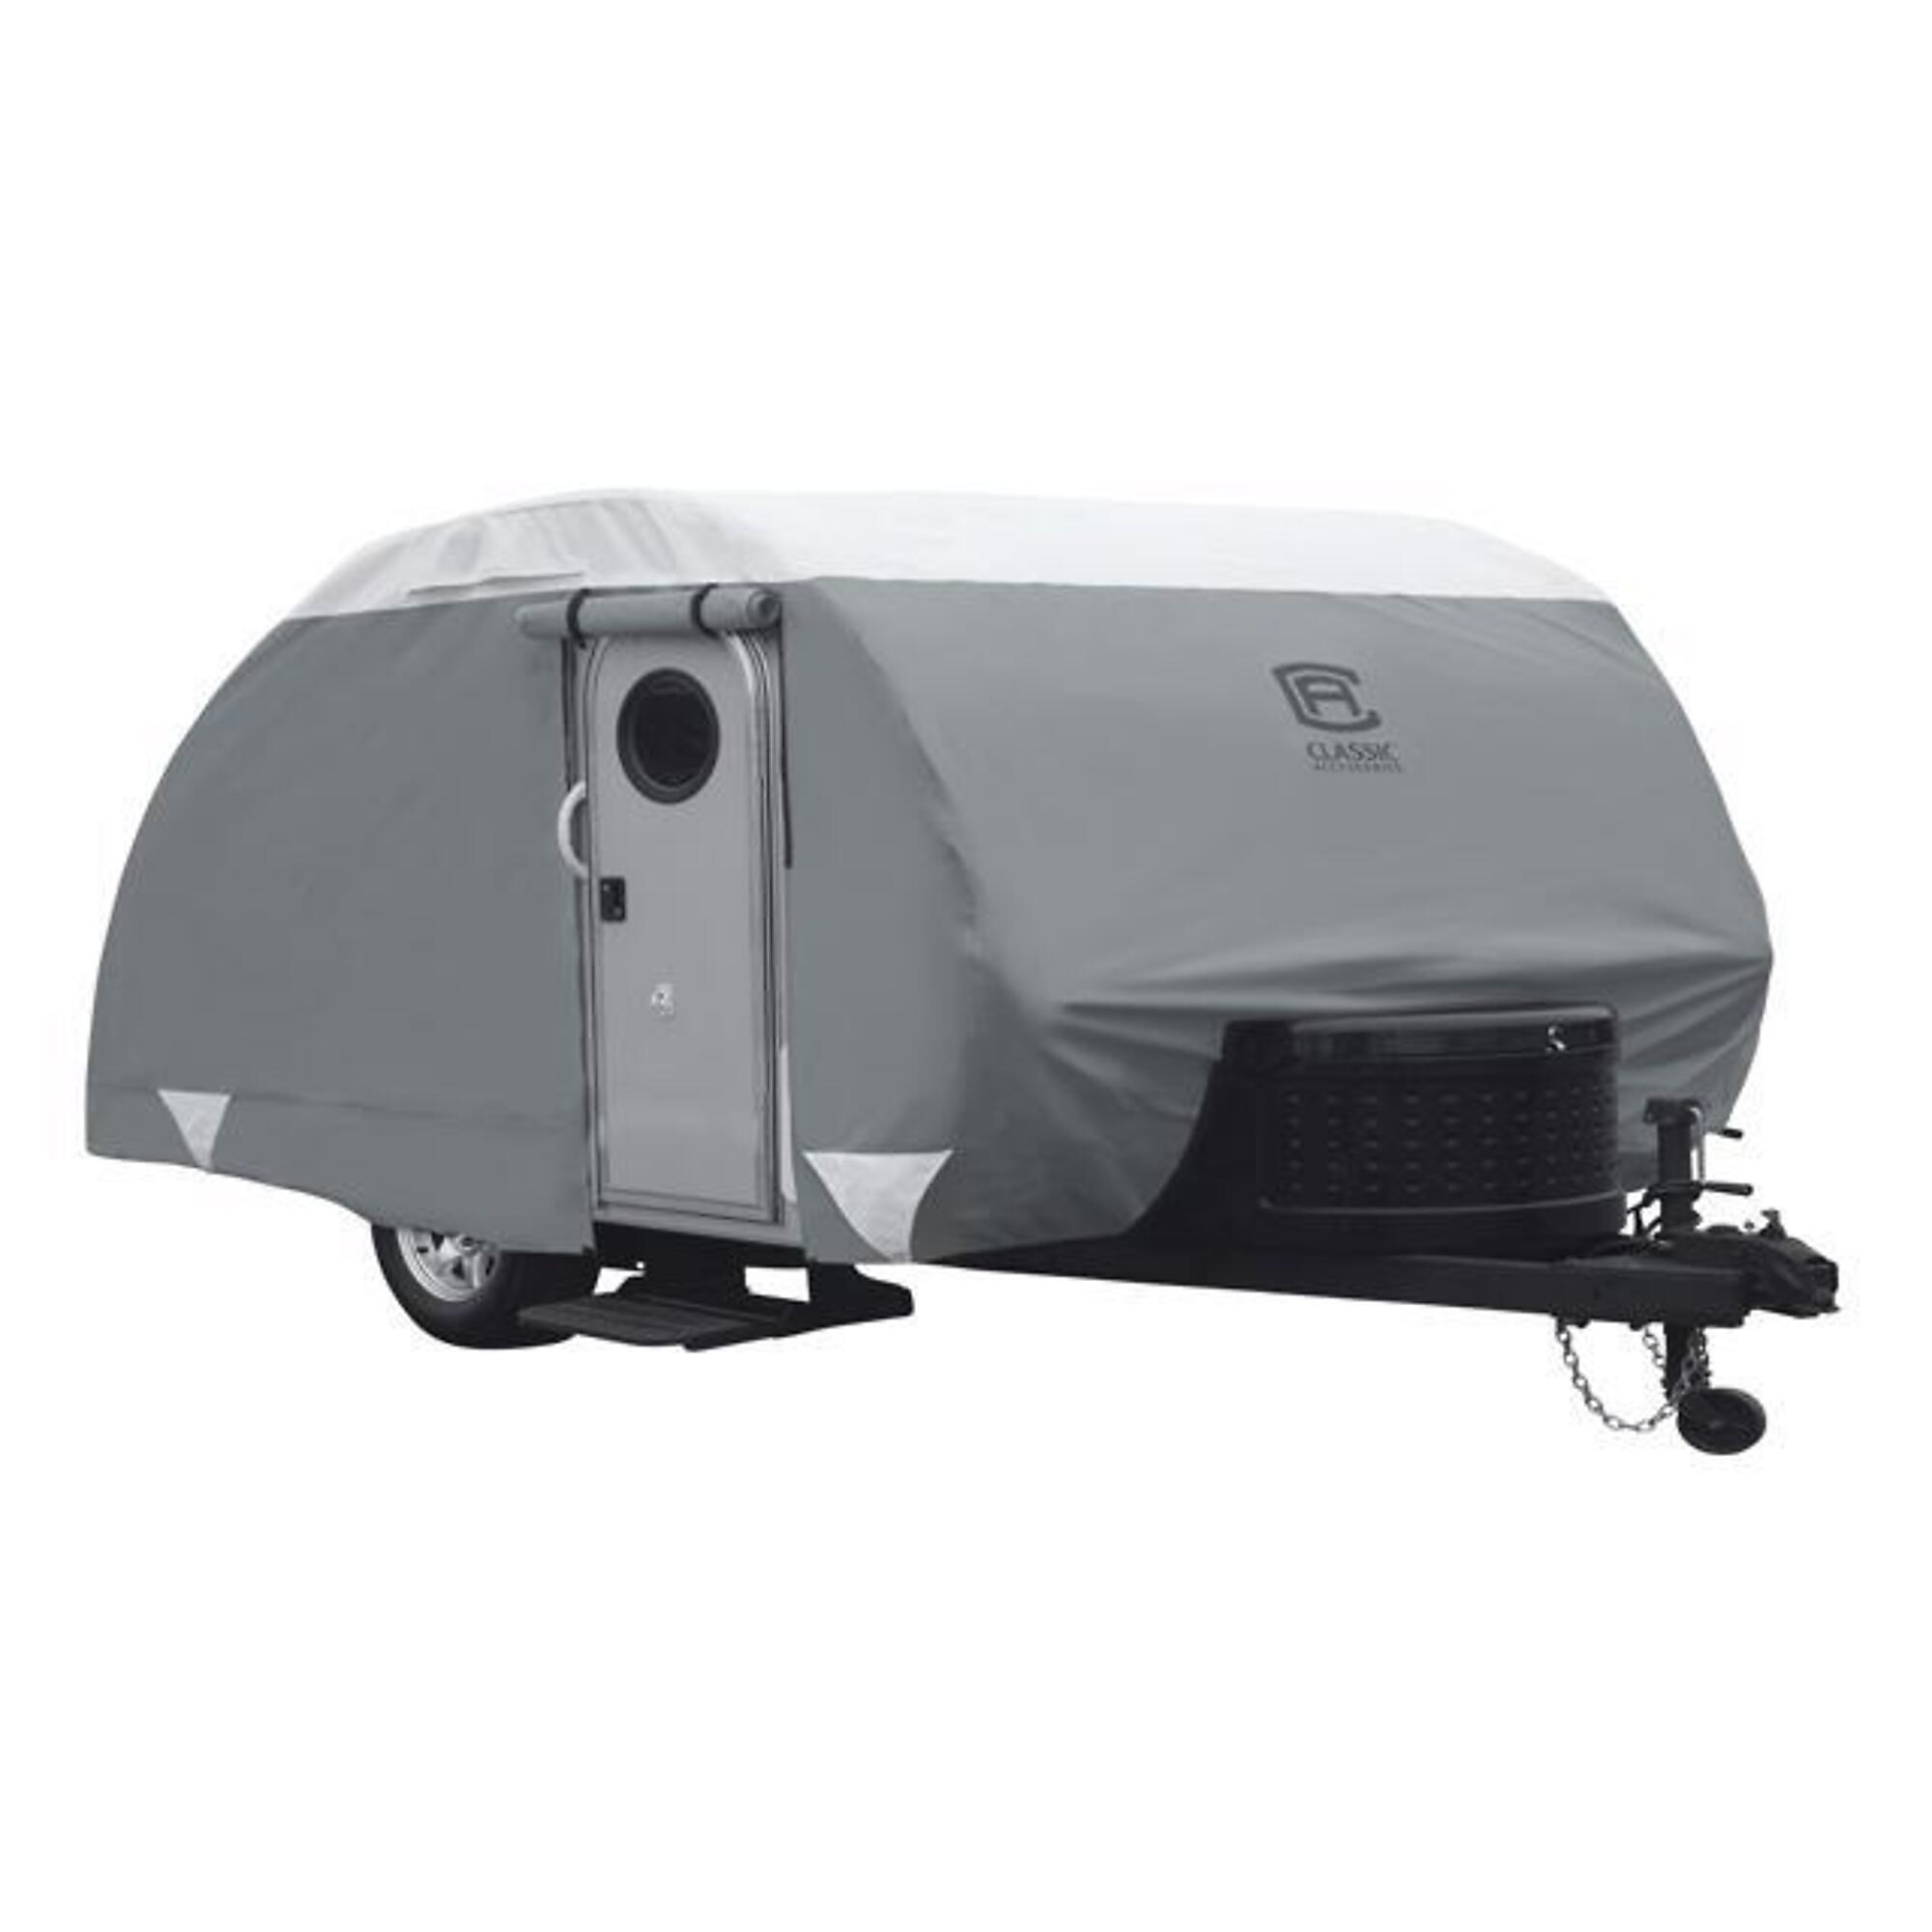 Classic Accessories, PolyPRO3 Teardrop Trailer Cover, Cover Type Travel Trailer, Color Gray, Material Polypropylene, Model 80-480-173101-RT